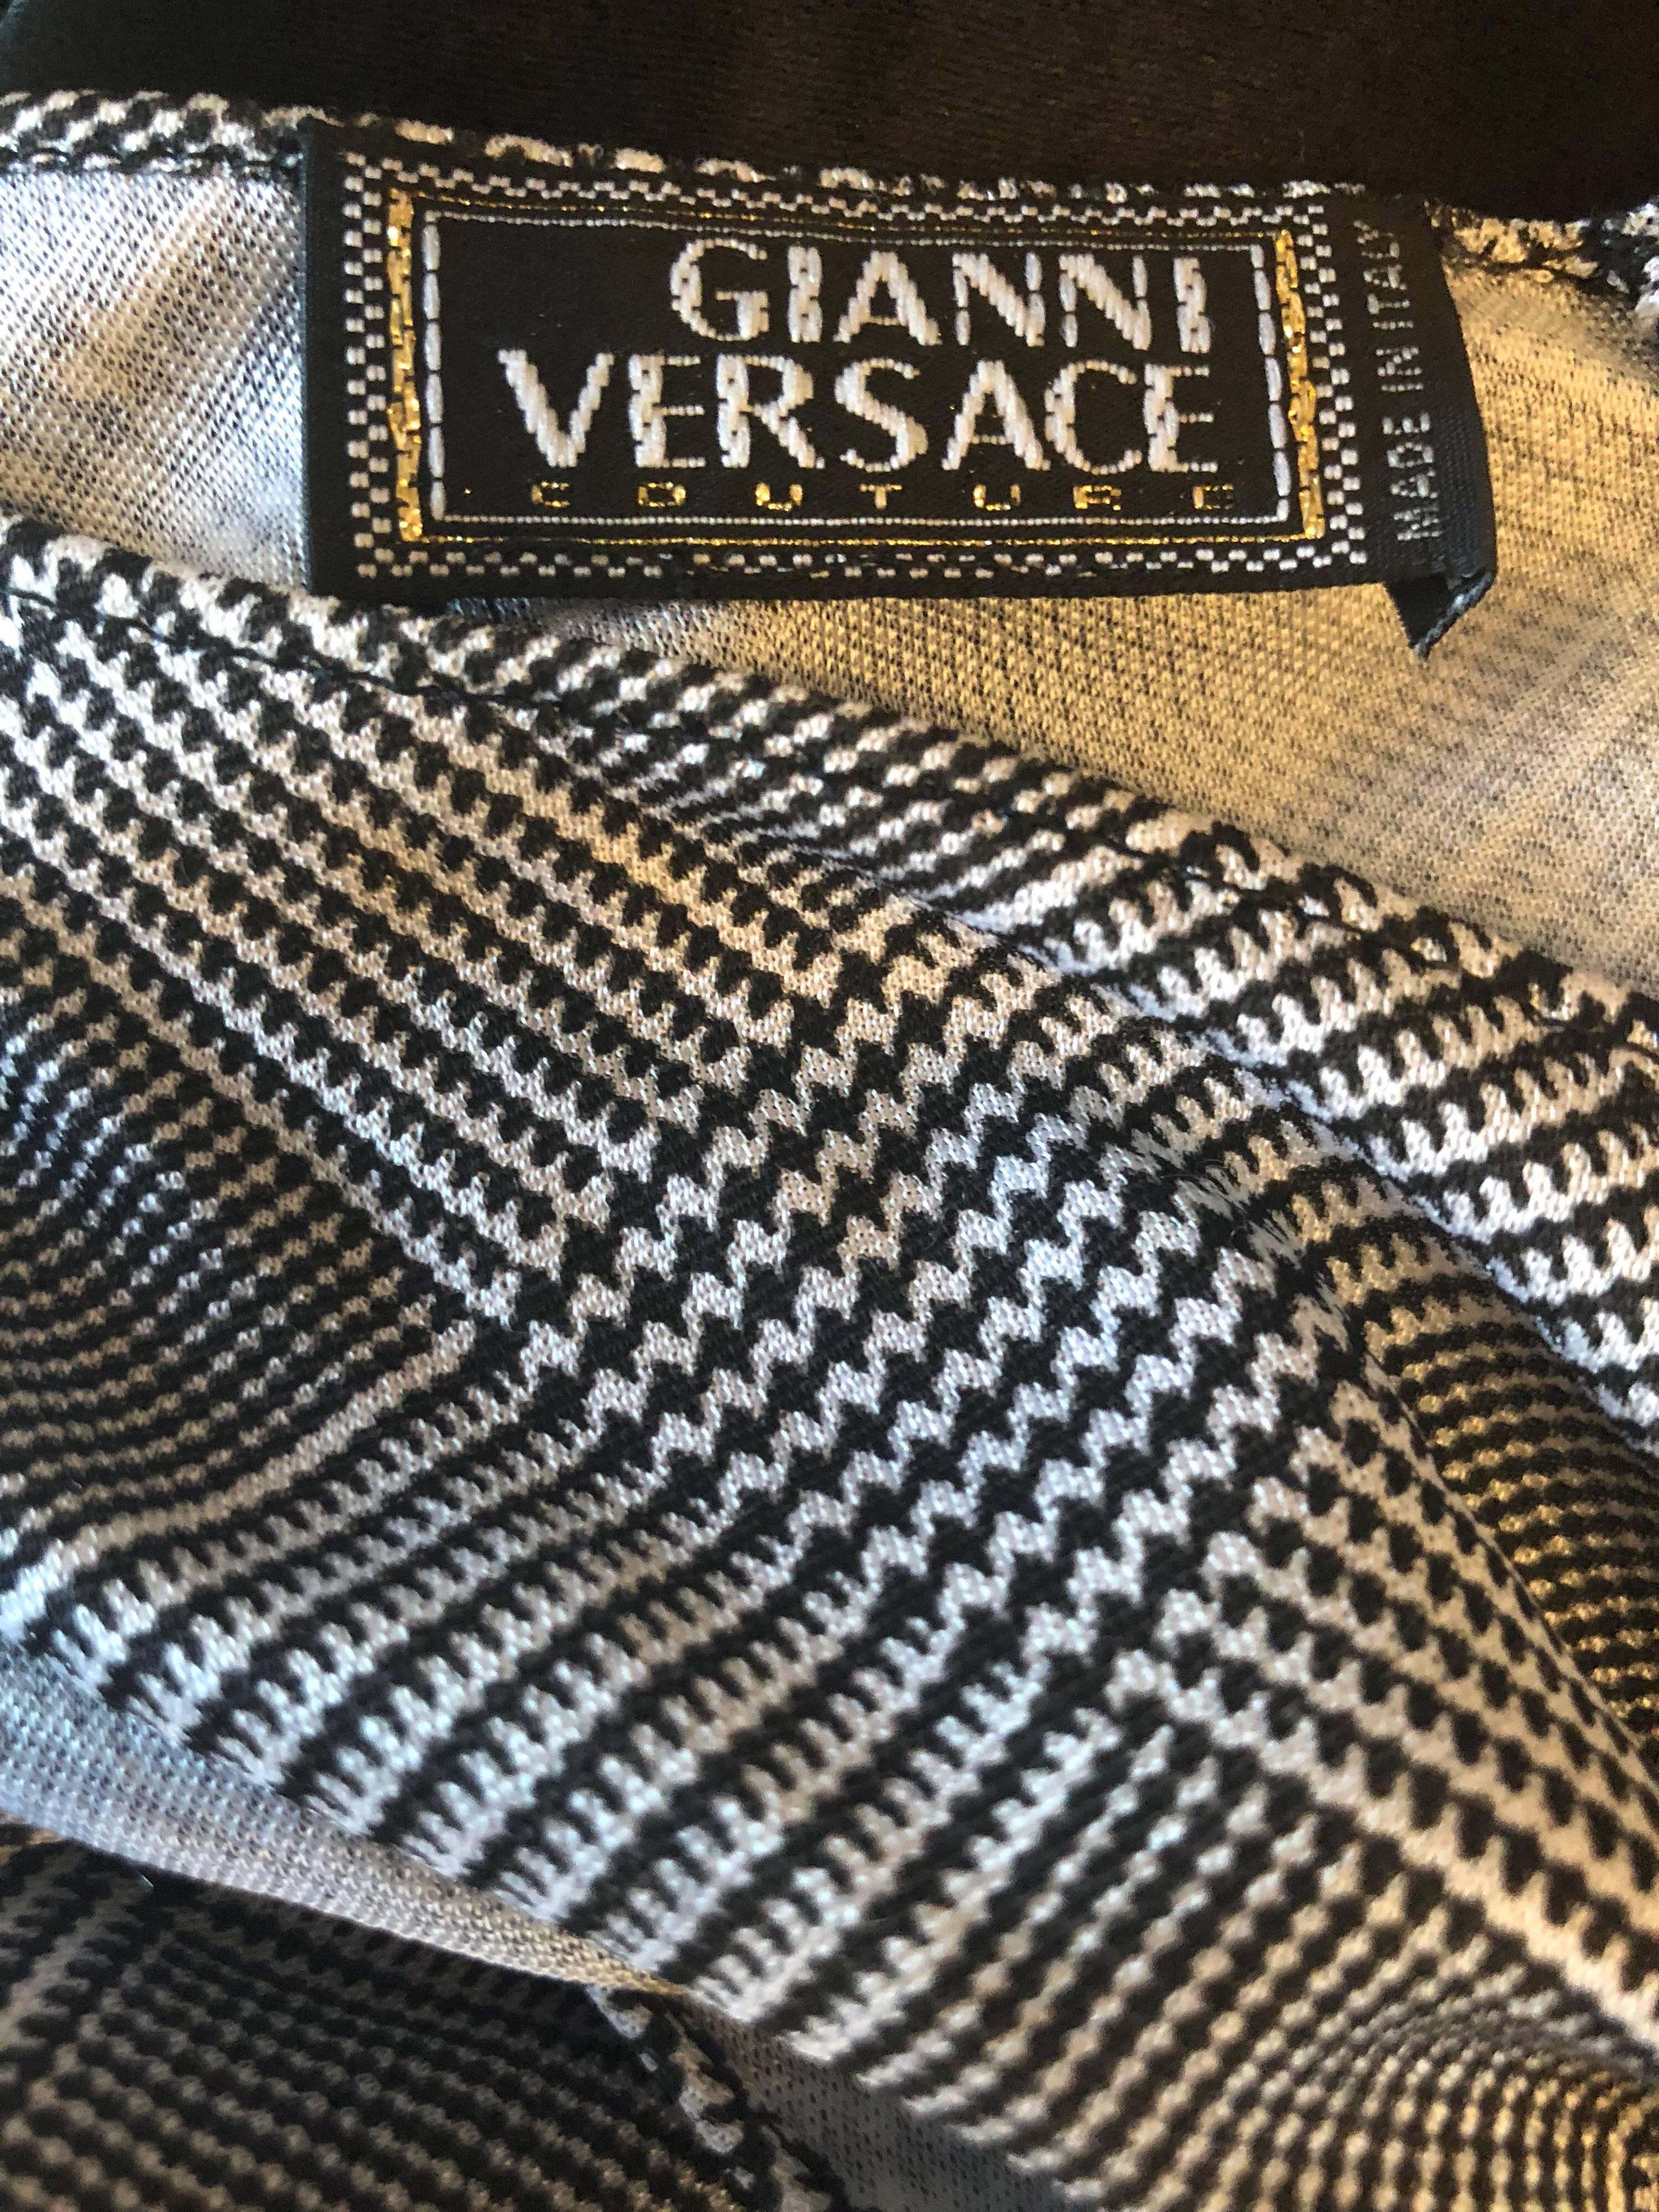 Gianni Versace Couture Rare S / S 1998 Vintage Black and White Cut - Out Dress For Sale 2